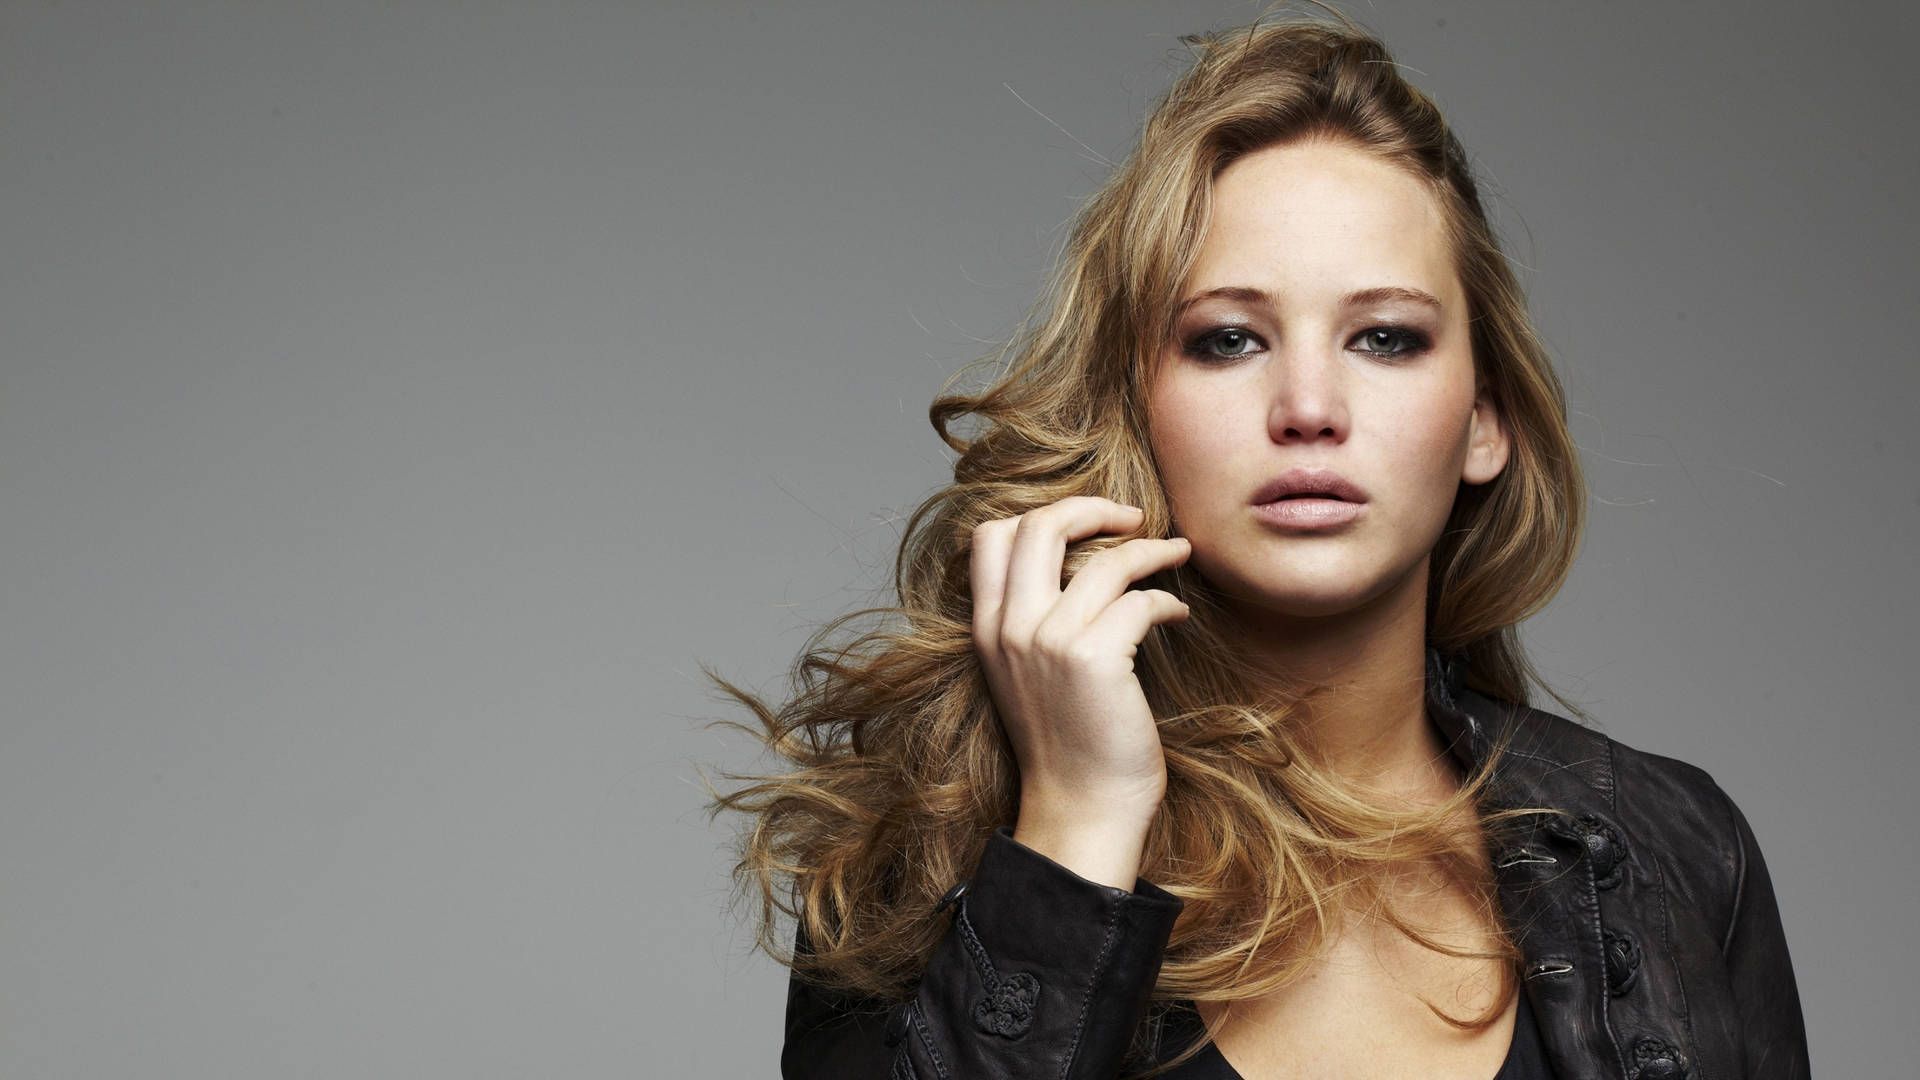 Jennifer Lawrence is an American actress and producer. She is known for her role as Katniss Everdeen in The Hunger Games film series. She has won several awards, including an Academy Award for Best Actress for her role in Silver Linings Playbook. - Jennifer Lawrence